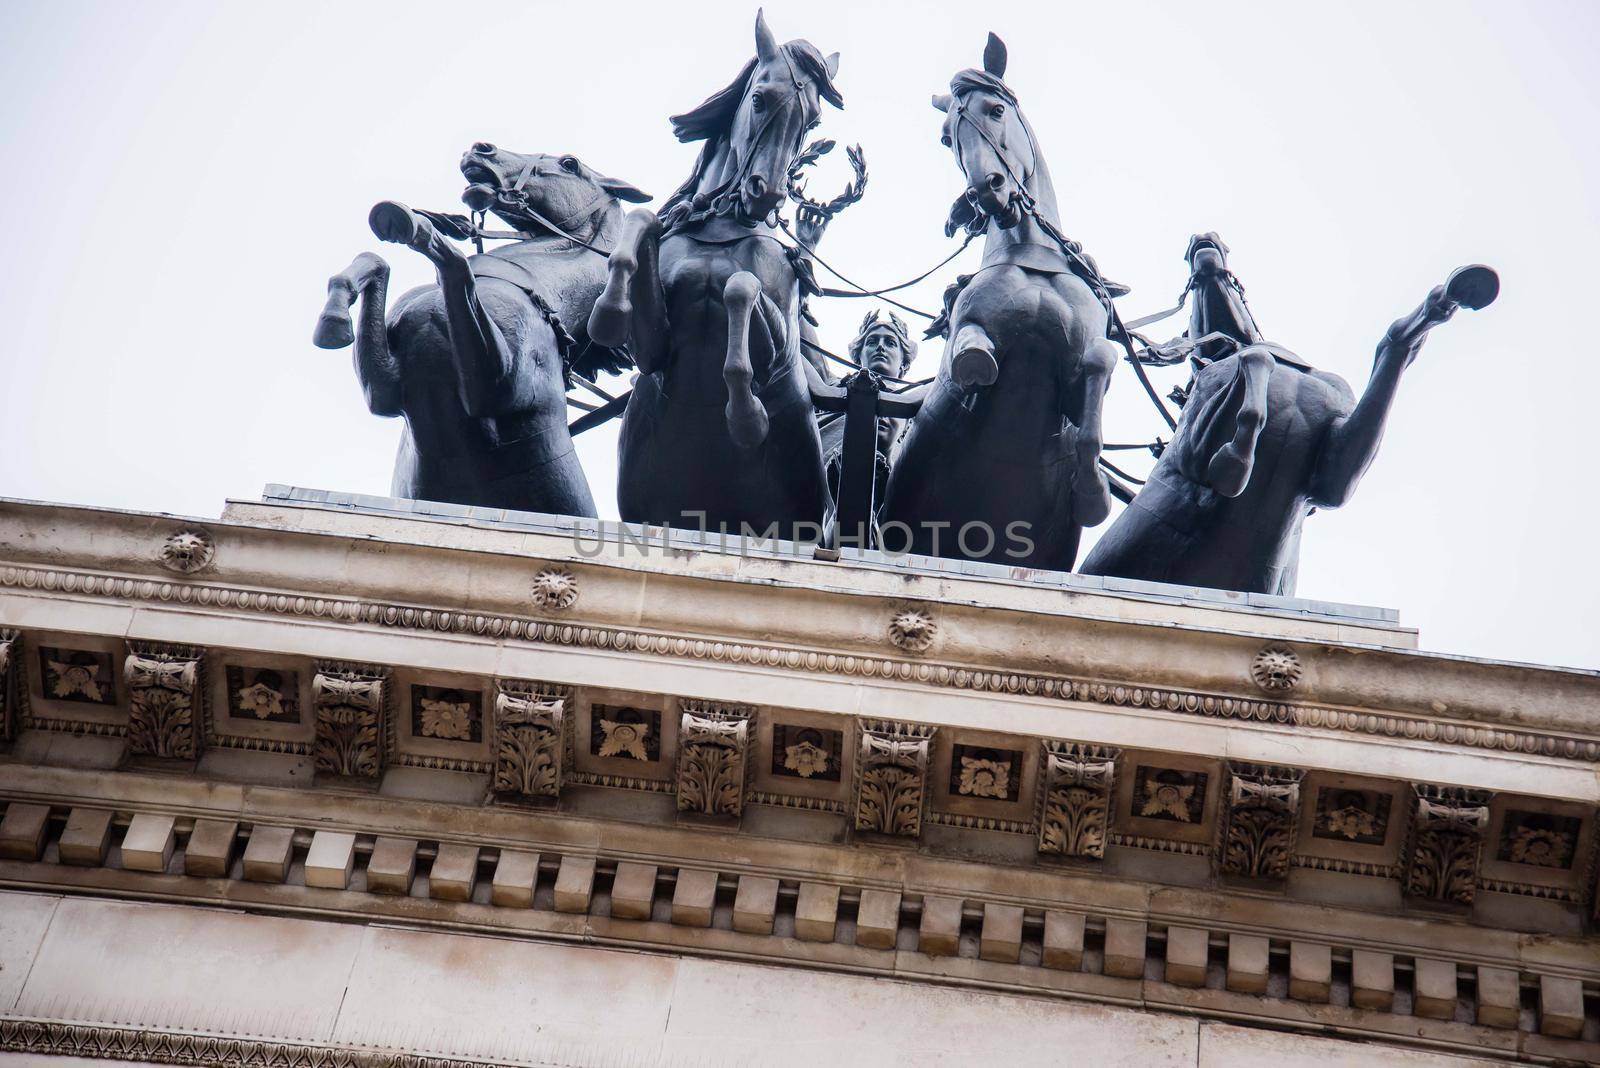 Horses of Helios Statue abstract view from below horses in Piccadilly London on January 27, 2017. by jyurinko